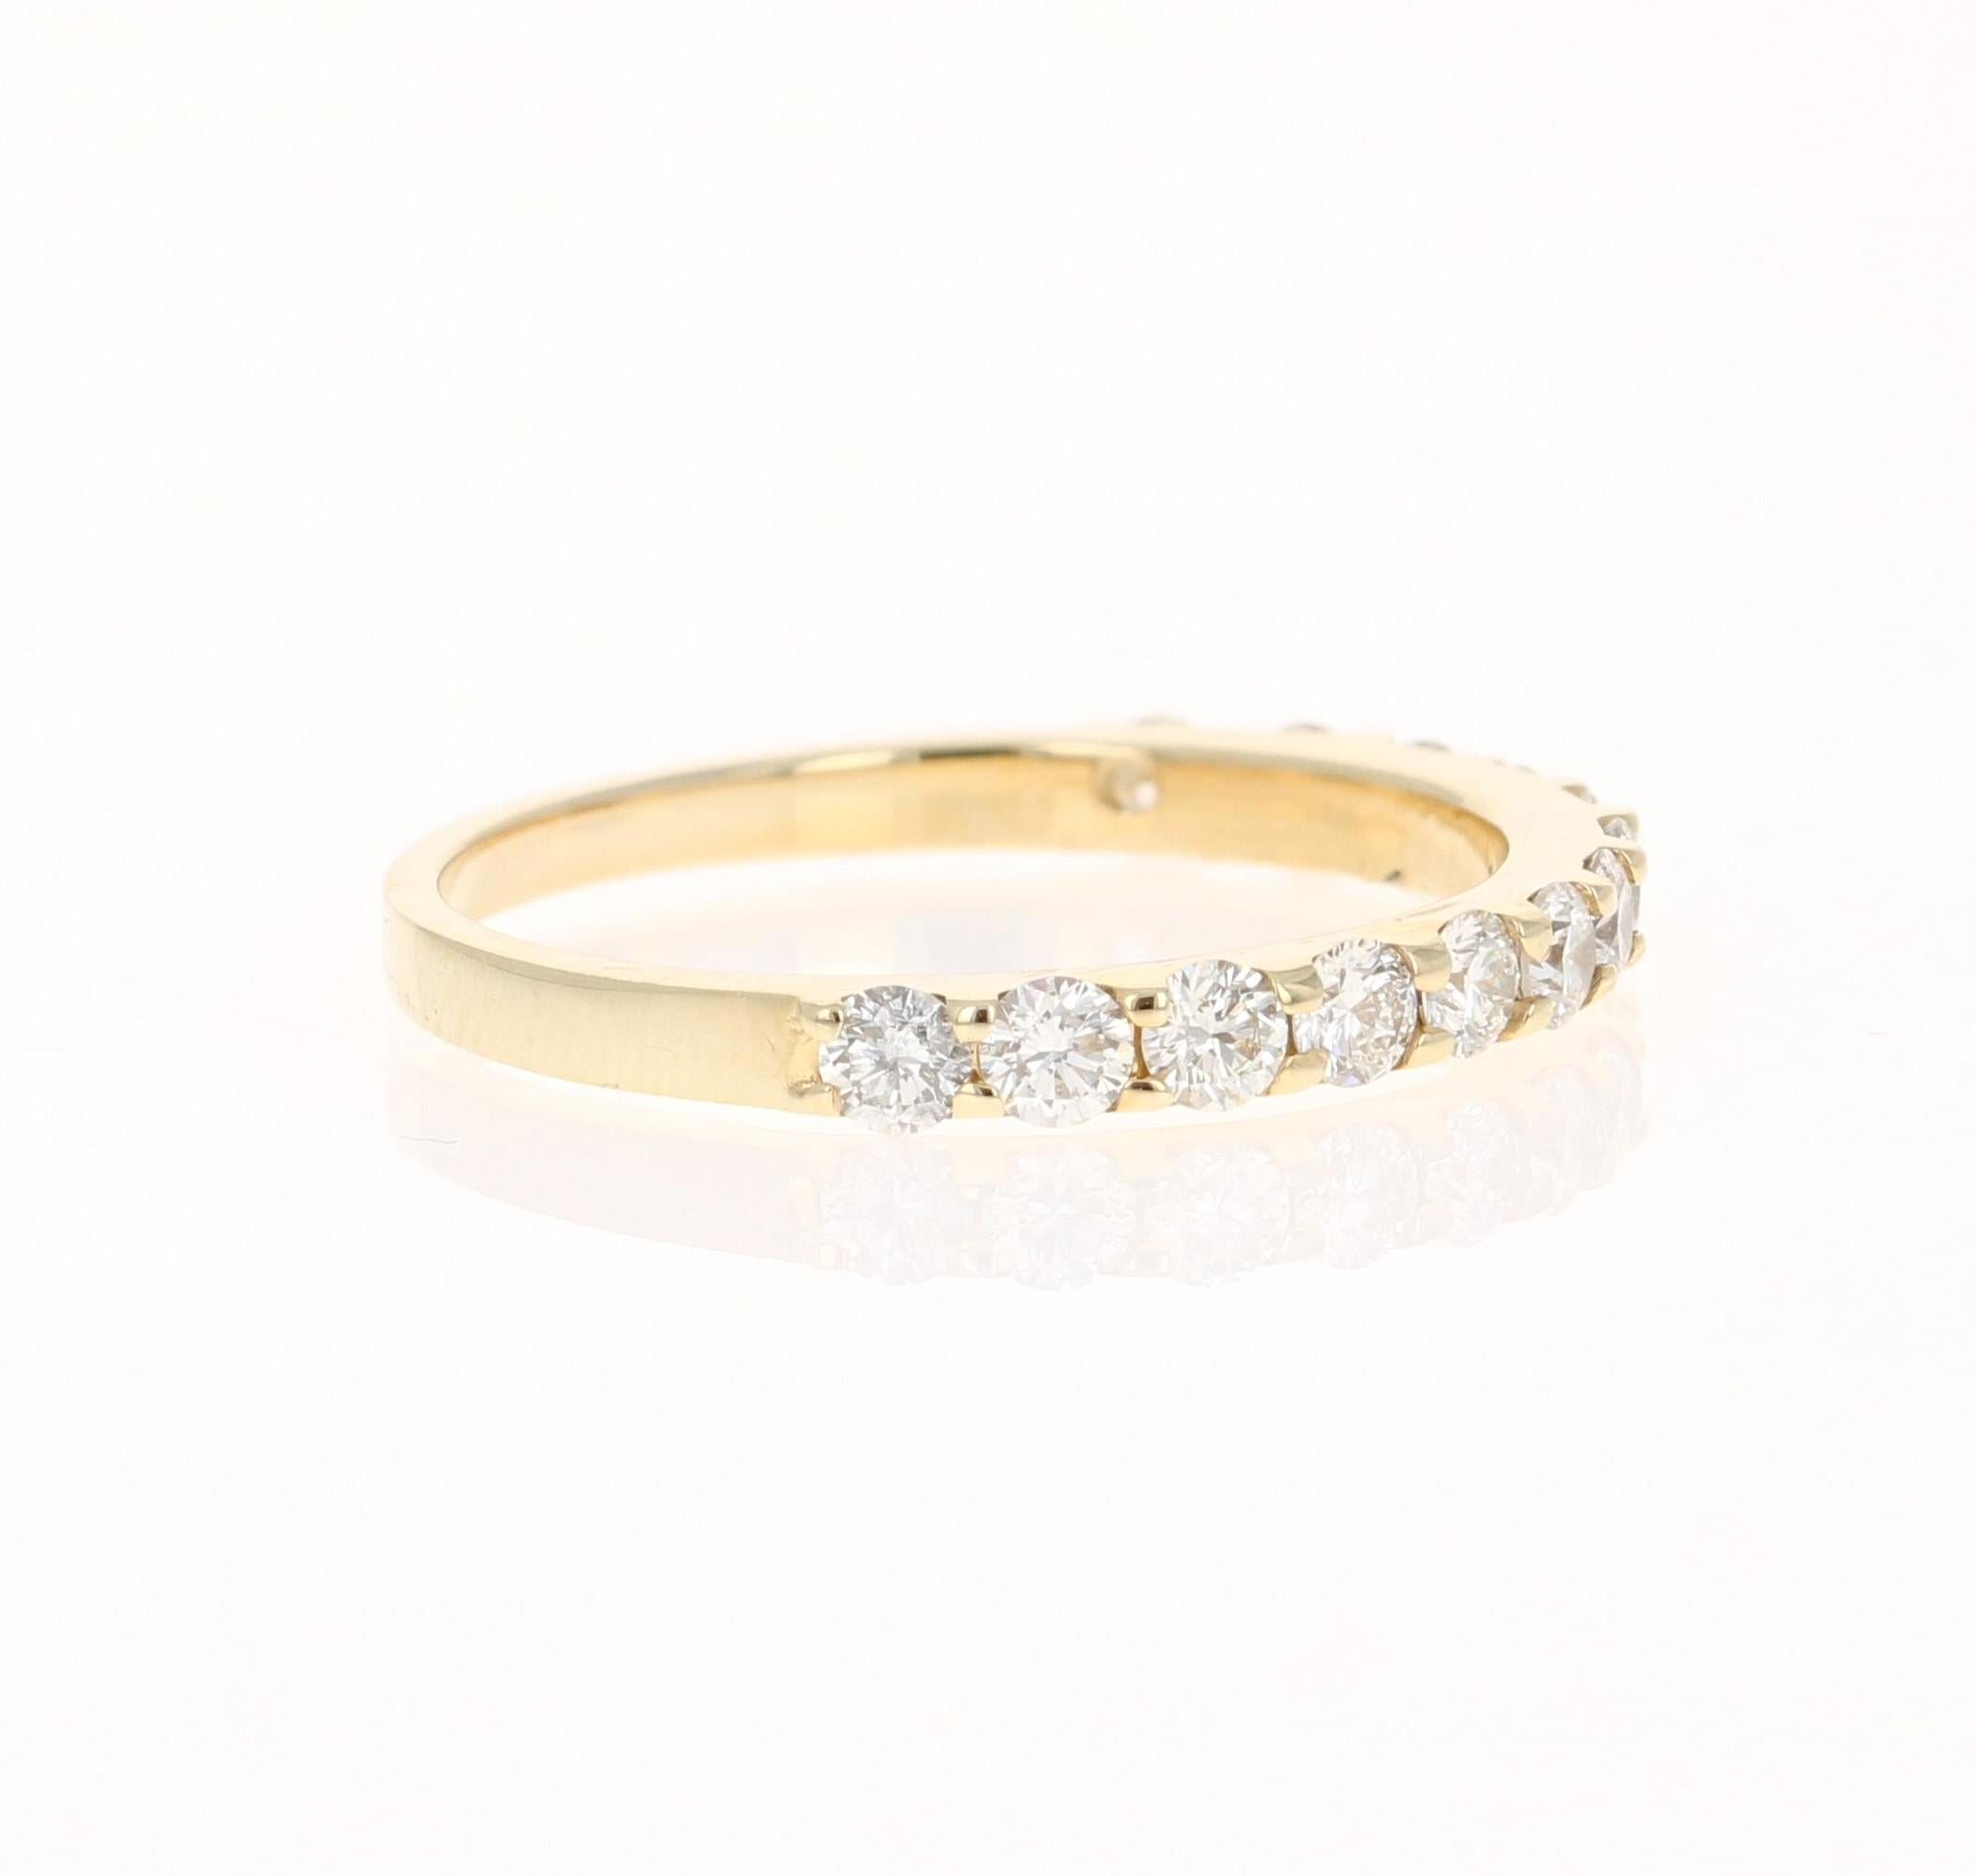 A beautiful band that can be worn as a single band or stack with other bands in other colors of Gold! 

This ring has 13 Round Cut Diamonds that weigh 0.75 Carats. The clarity and color of the diamonds are VS-H.

Crafted in 14 Karat Yellow Gold and